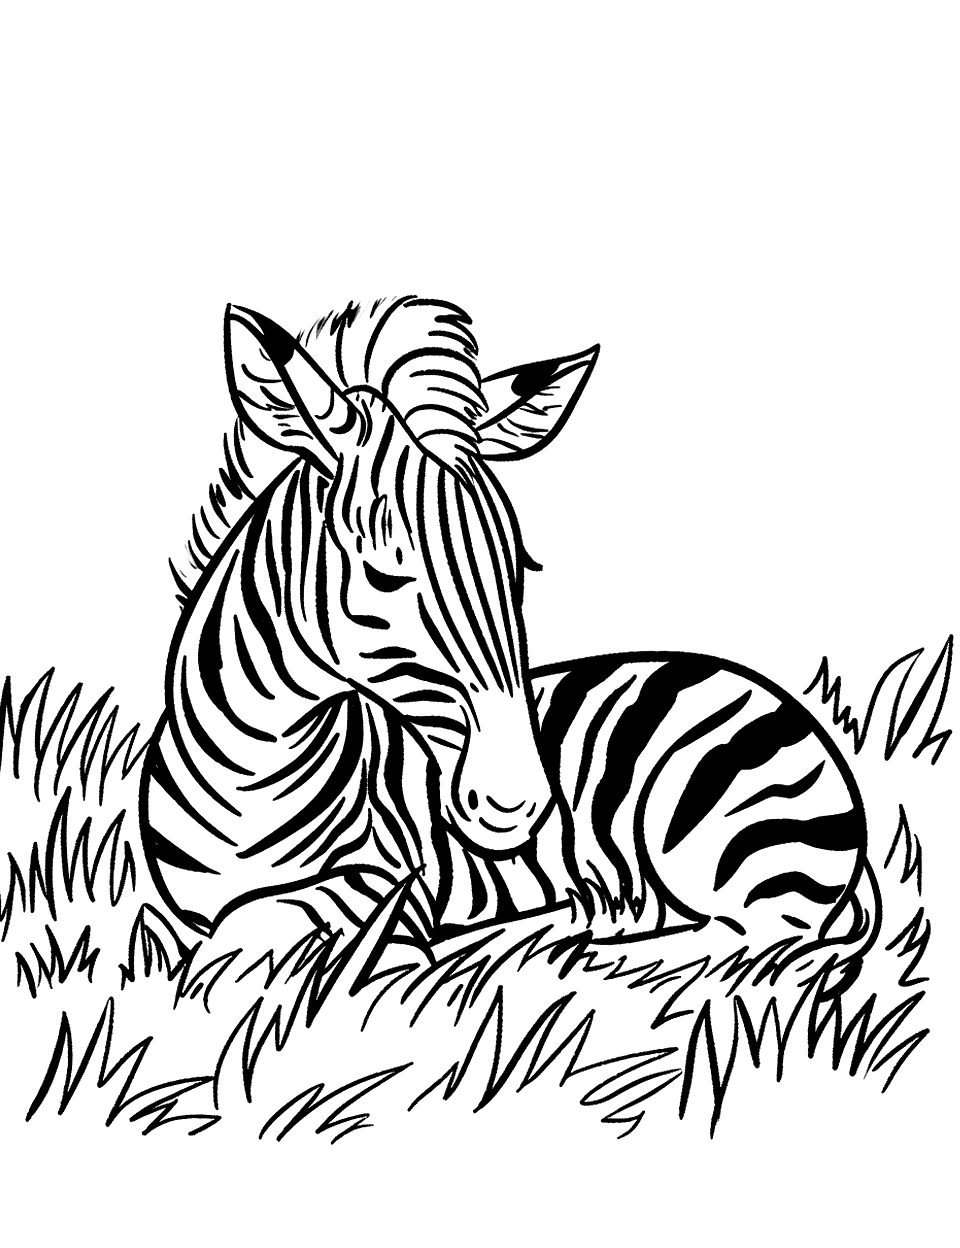 Zebra Lying Down Coloring Page - A zebra lying down in the grass taking a rest.